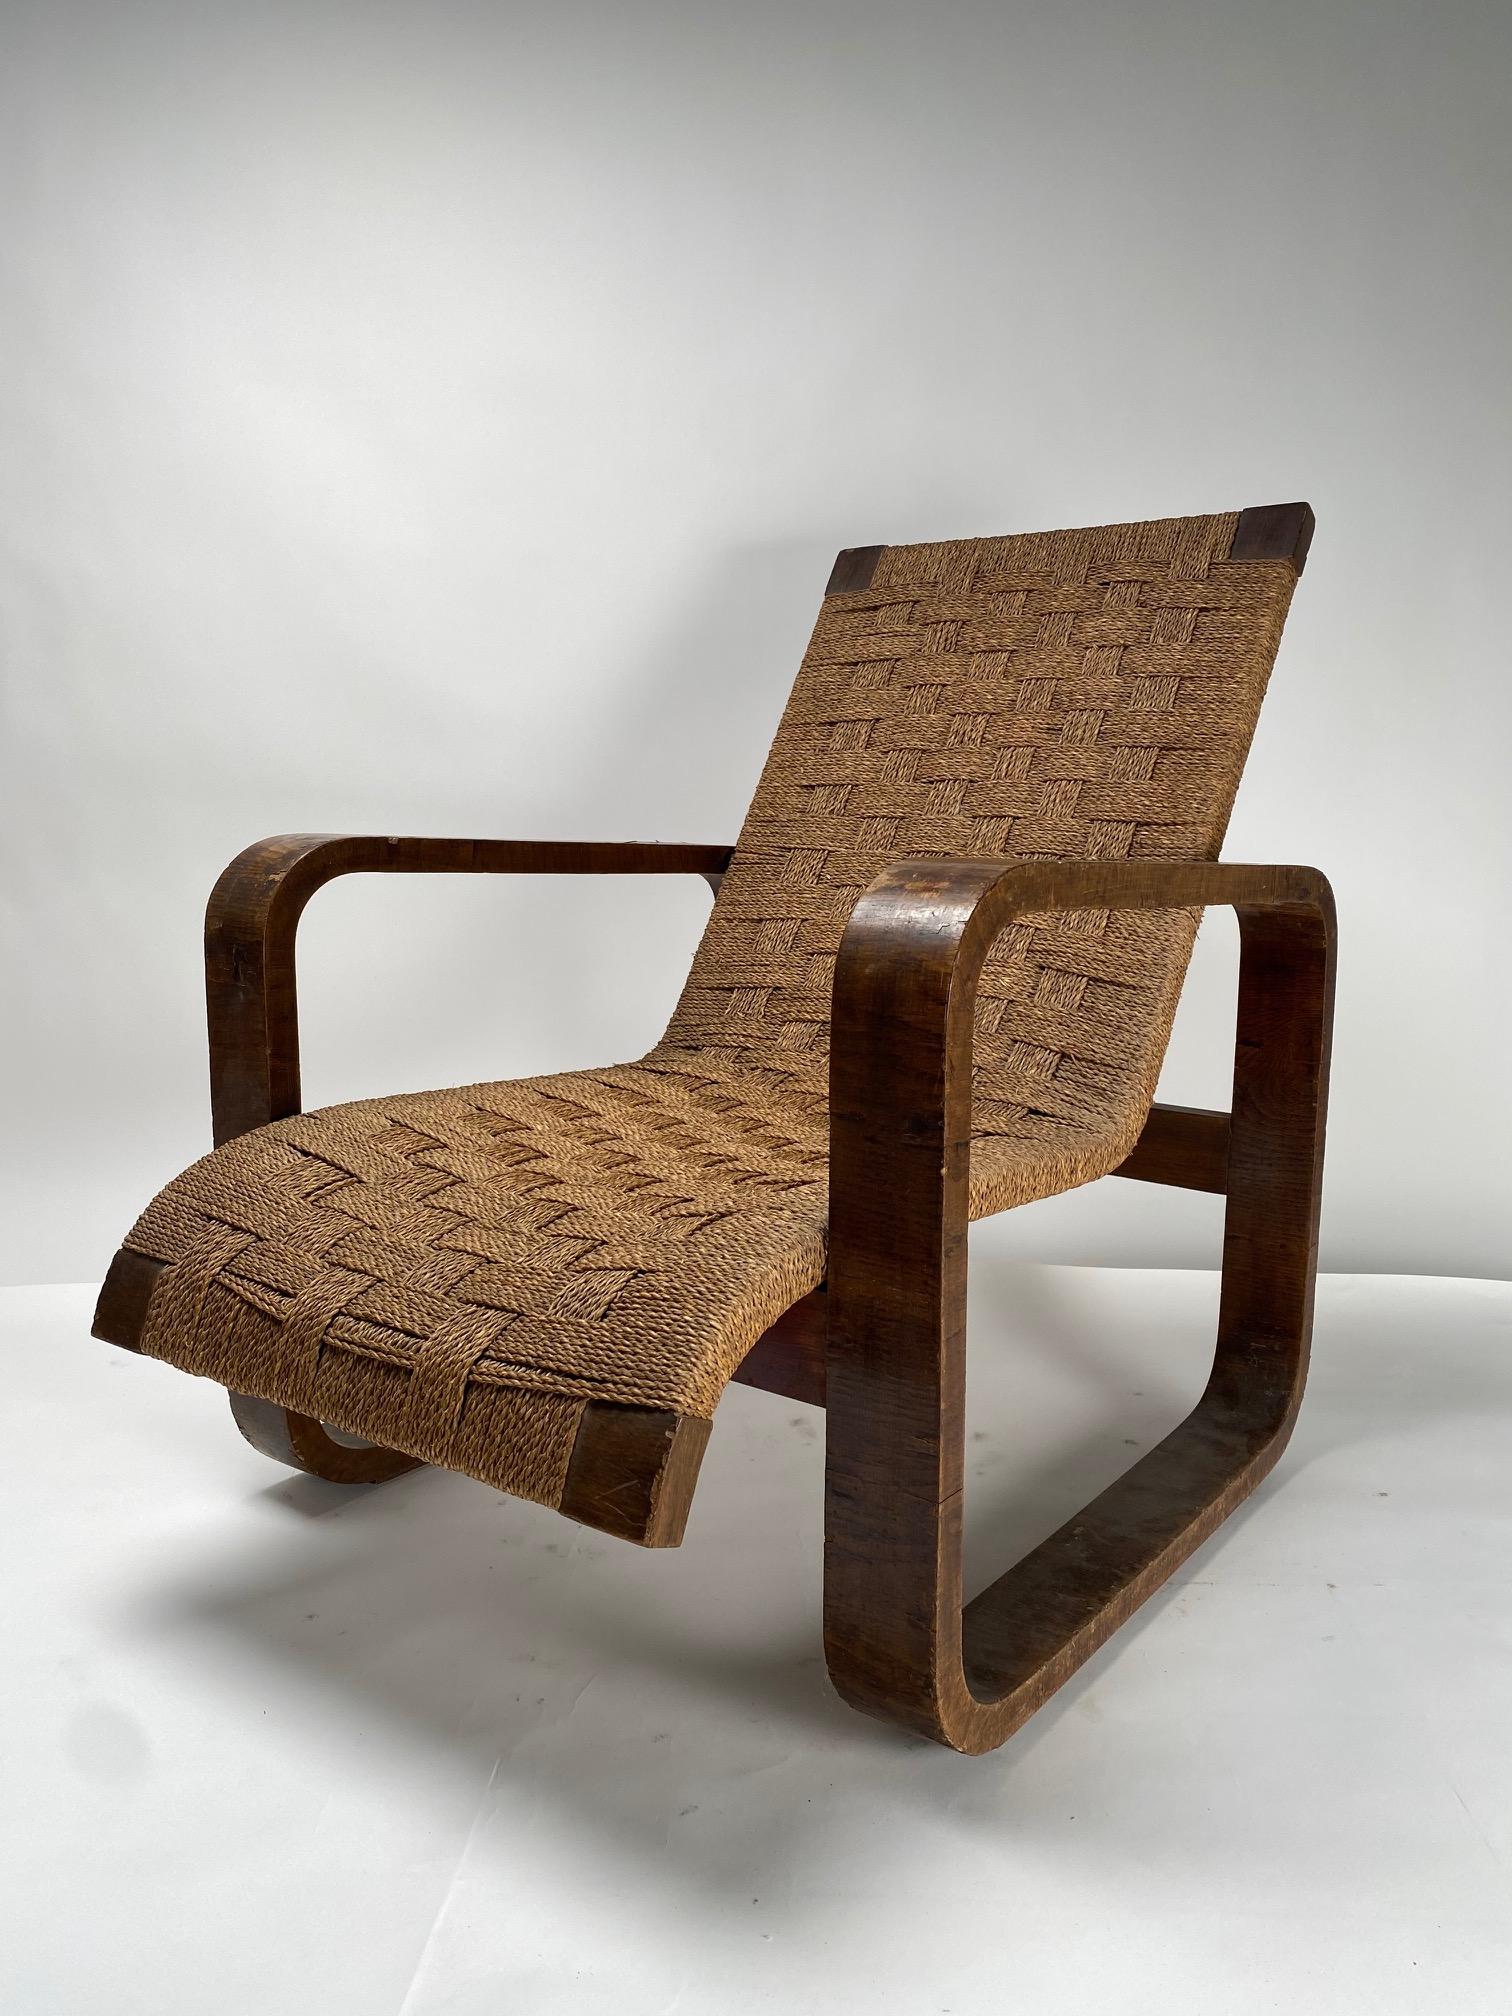 Sculptural Armchair in wood and rope, Giuseppe Pagano (Attr), Italy, 1940s In Fair Condition For Sale In Argelato, BO